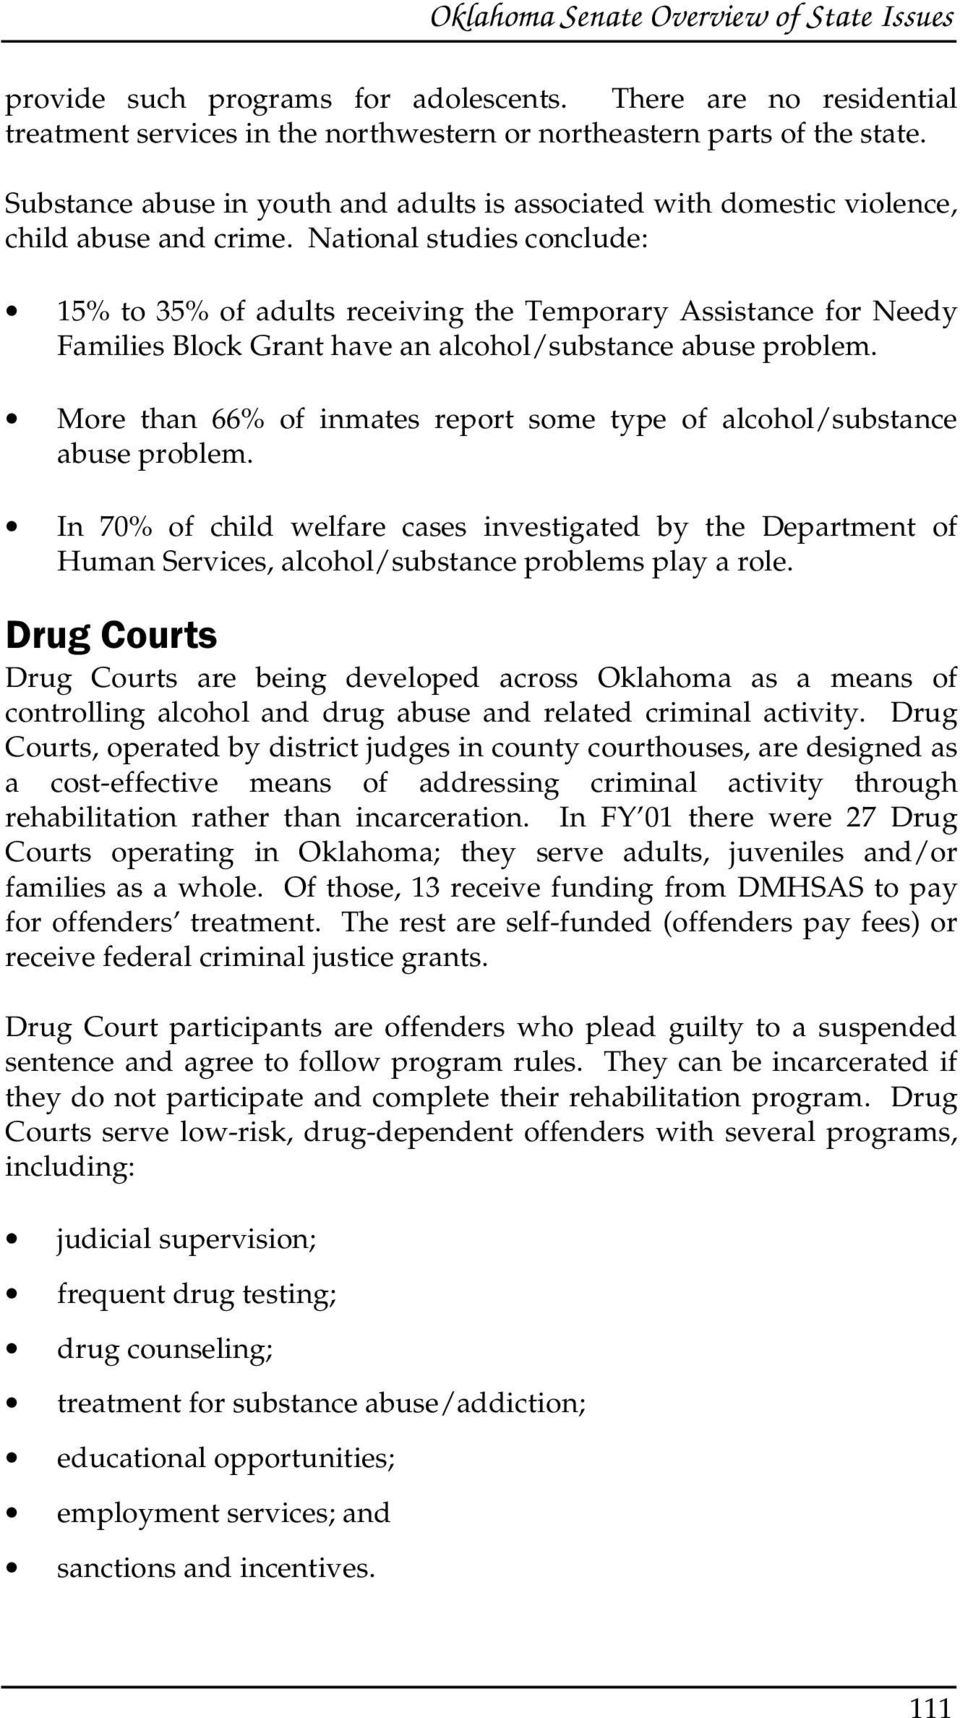 National studies conclude: 15% to 35% of adults receiving the Temporary Assistance for Needy Families Block Grant have an alcohol/substance abuse problem.